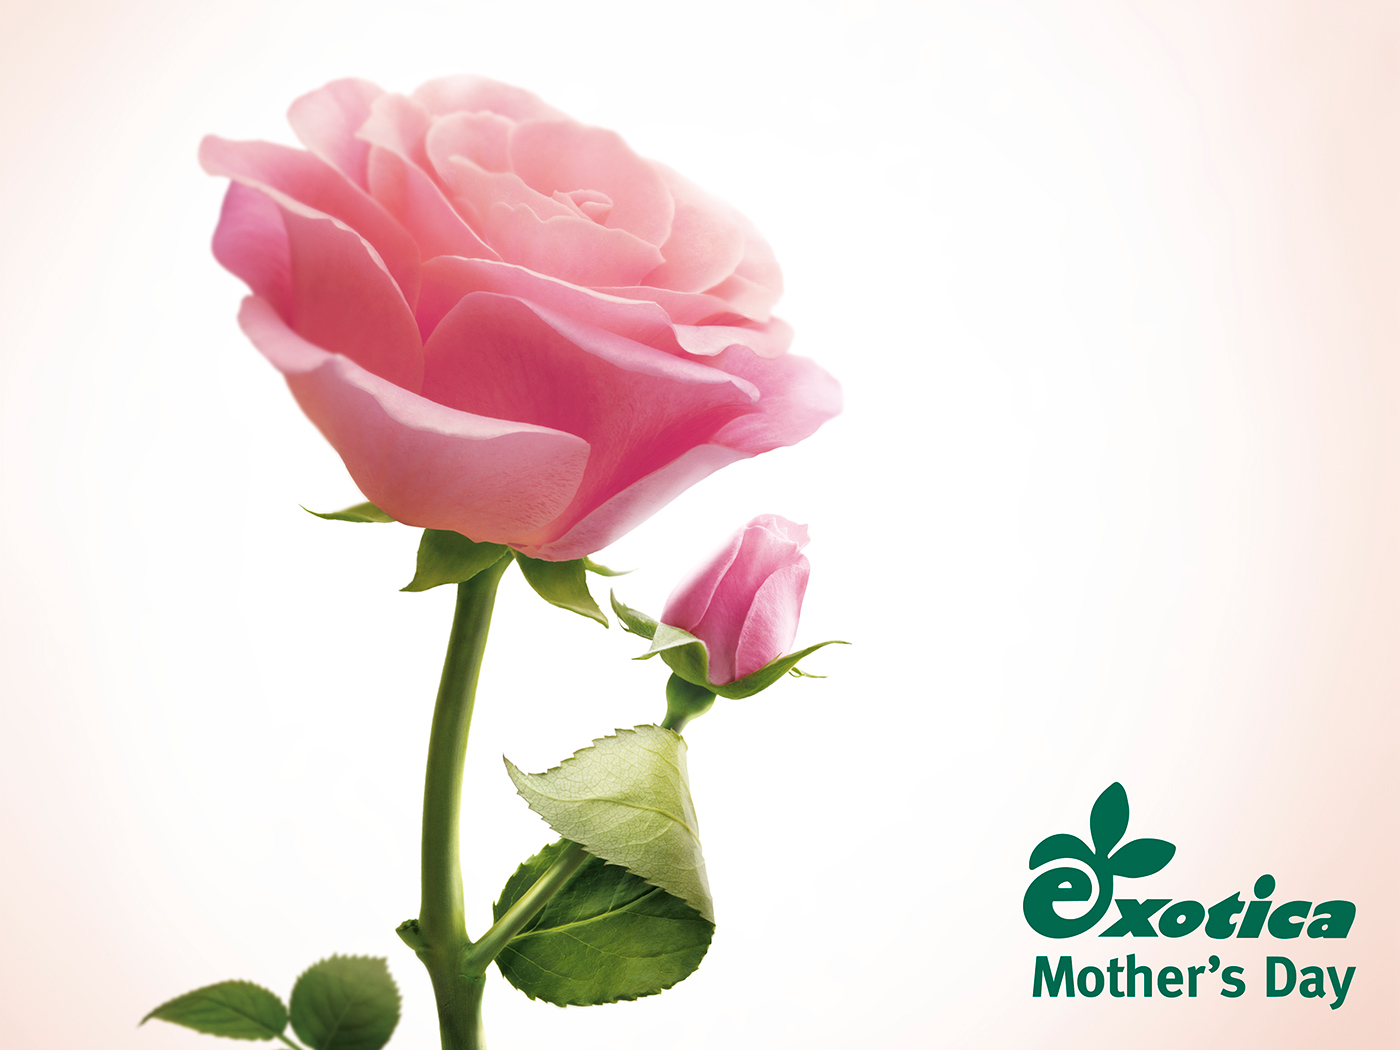 exotica Flowers ad Fathersday Father's Day Mother's Day mothersday wedding Outdoor Beirut lebanon Love Cars Leo Burnett joseph abi saab